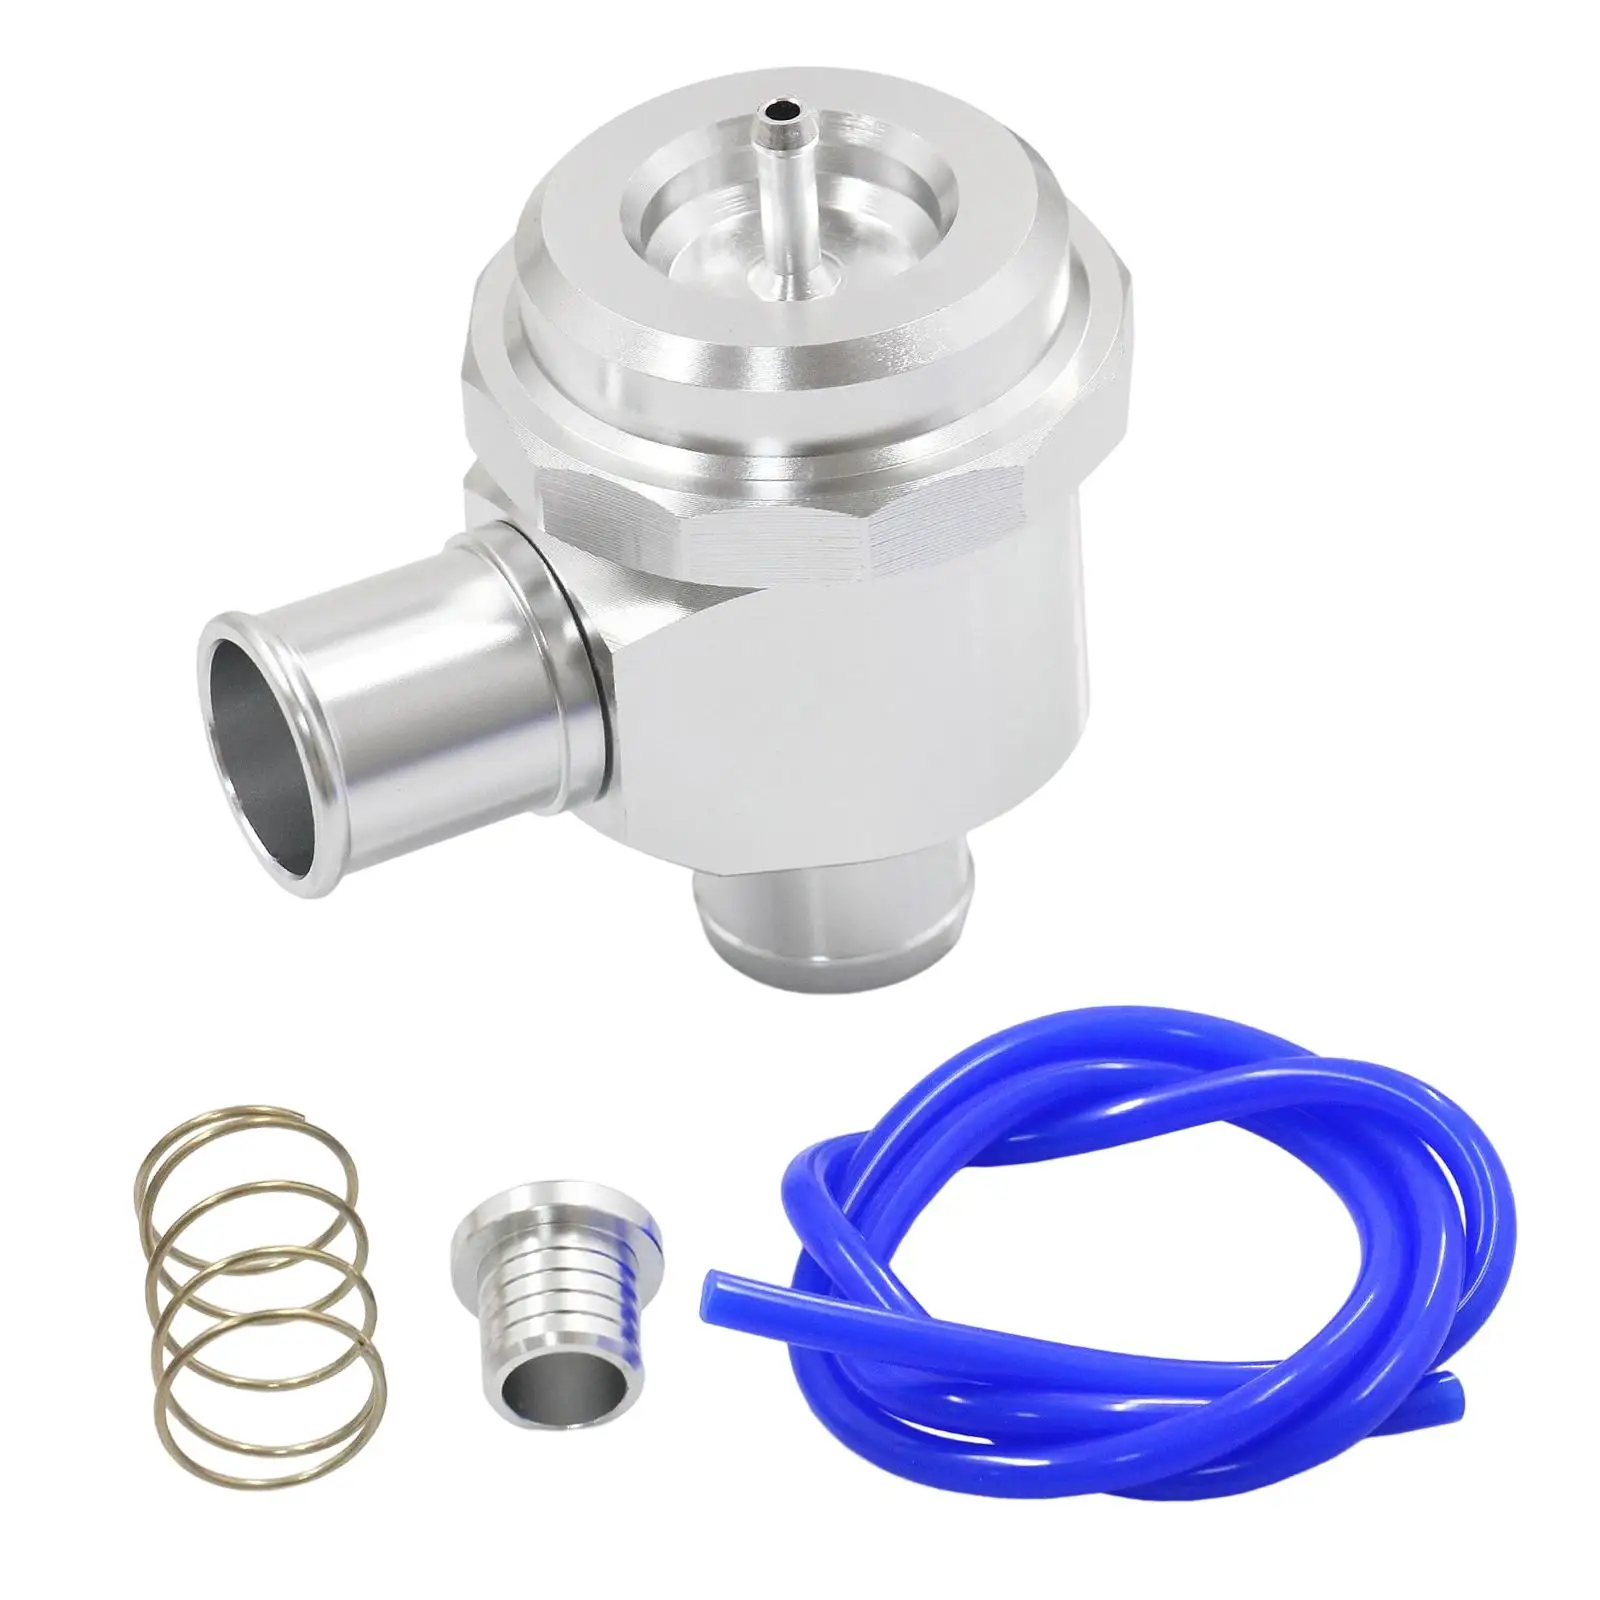 Diverter Blow Off Valve Multipurpose Heavy Duty Adjustable Easy Installation Professional for Automotive Direct Replaces